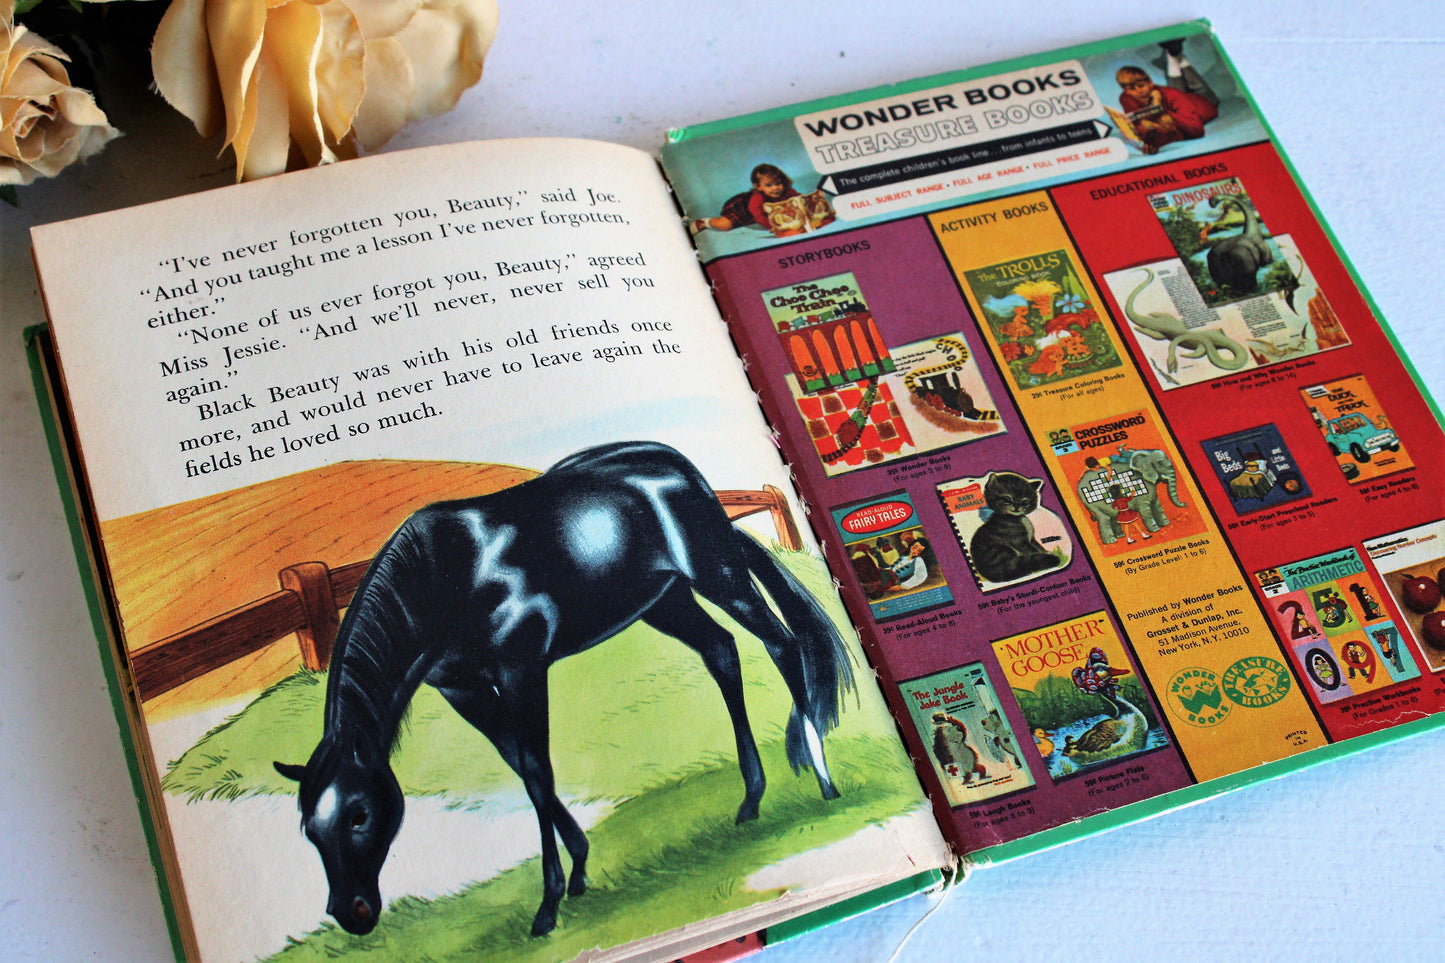 Vintage 1950s Black Beauty Book, Illustrated and Edited For Children